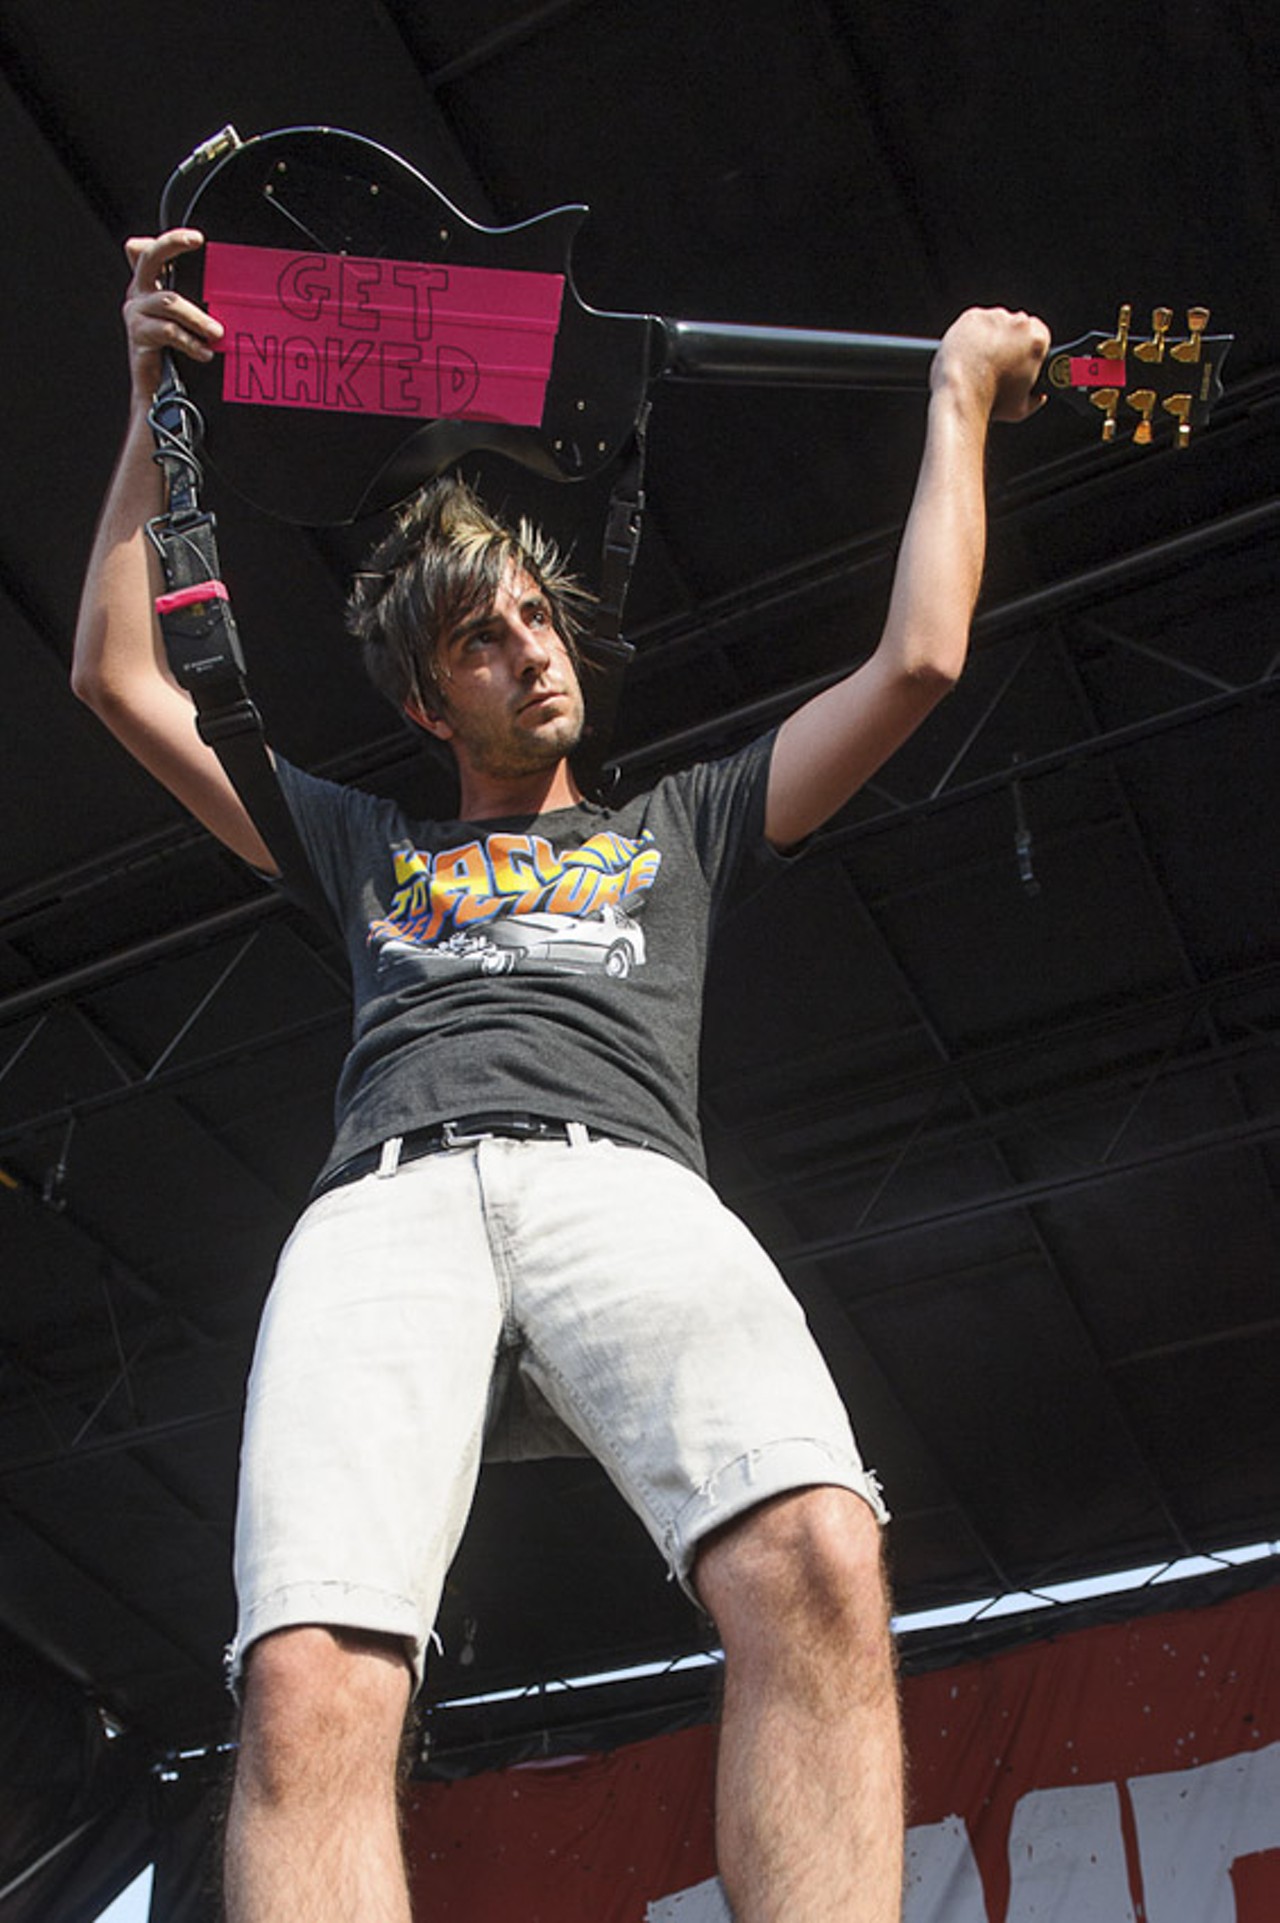 All Time Low performing at Warped Tour at the Verizon Wireless Amphitheater in St. Louis on July 5, 2012.